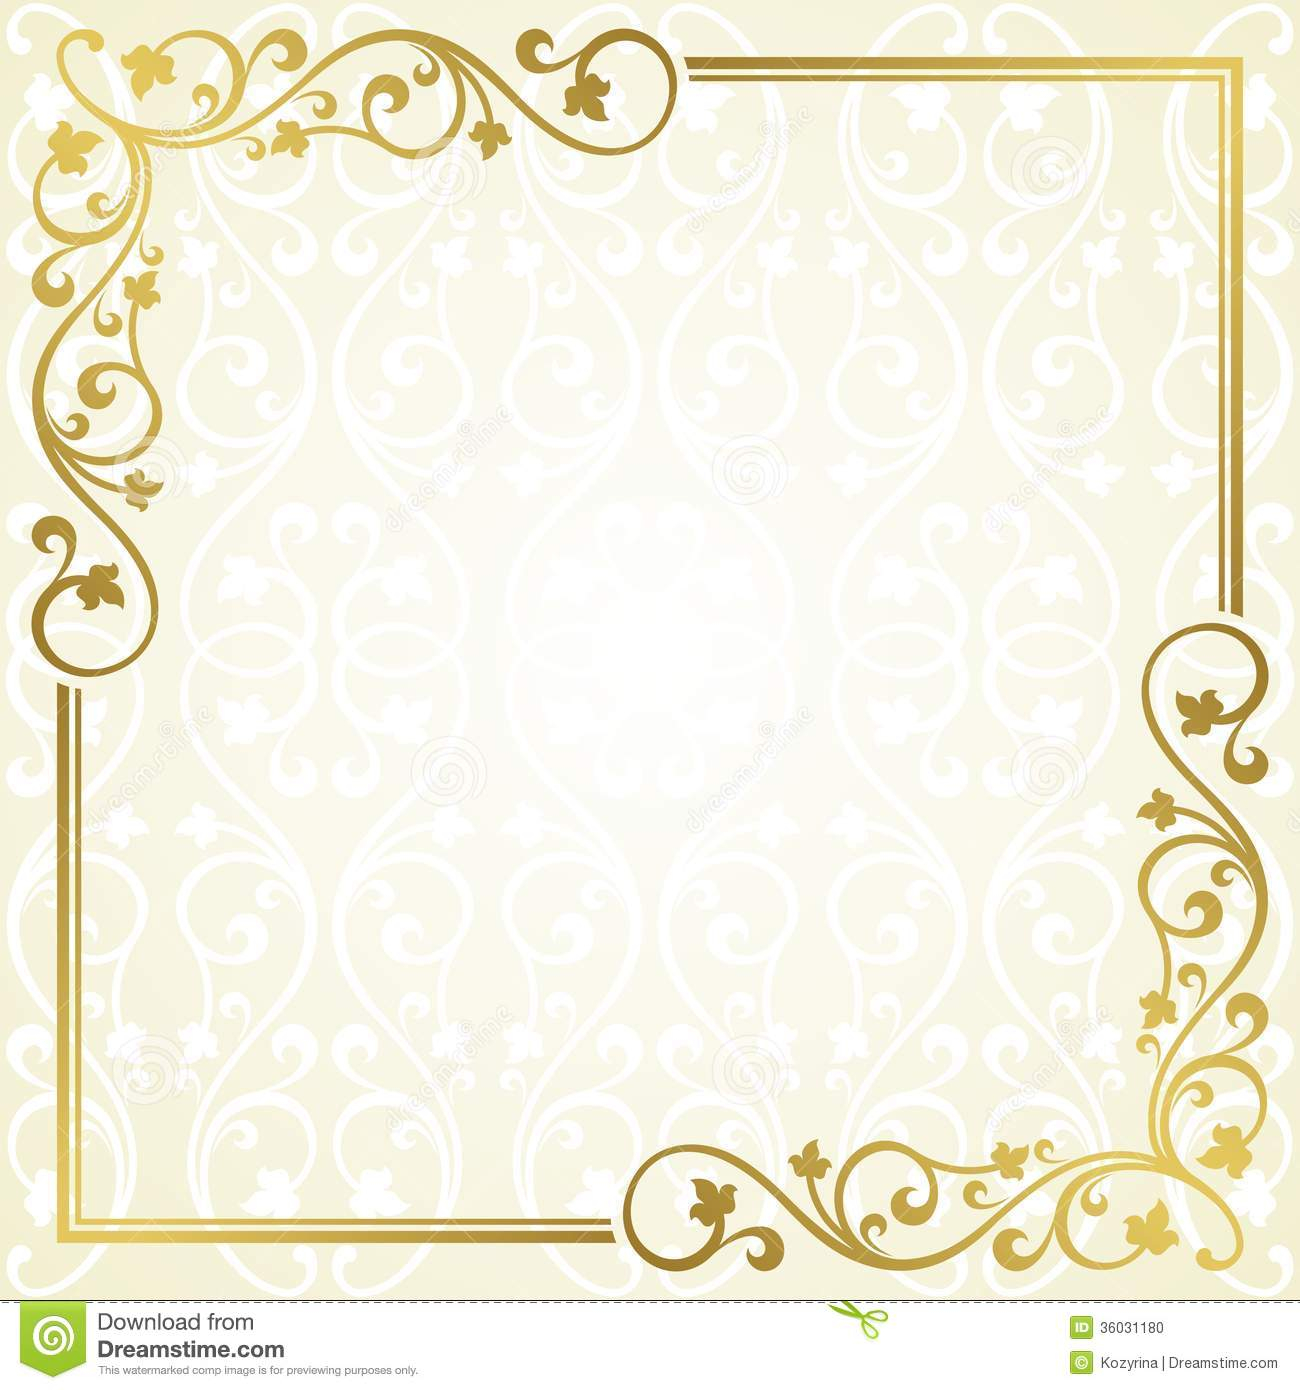 78 Make An Blank Invitation Card Template Free Examples Blank within measurements 1300 X 1390